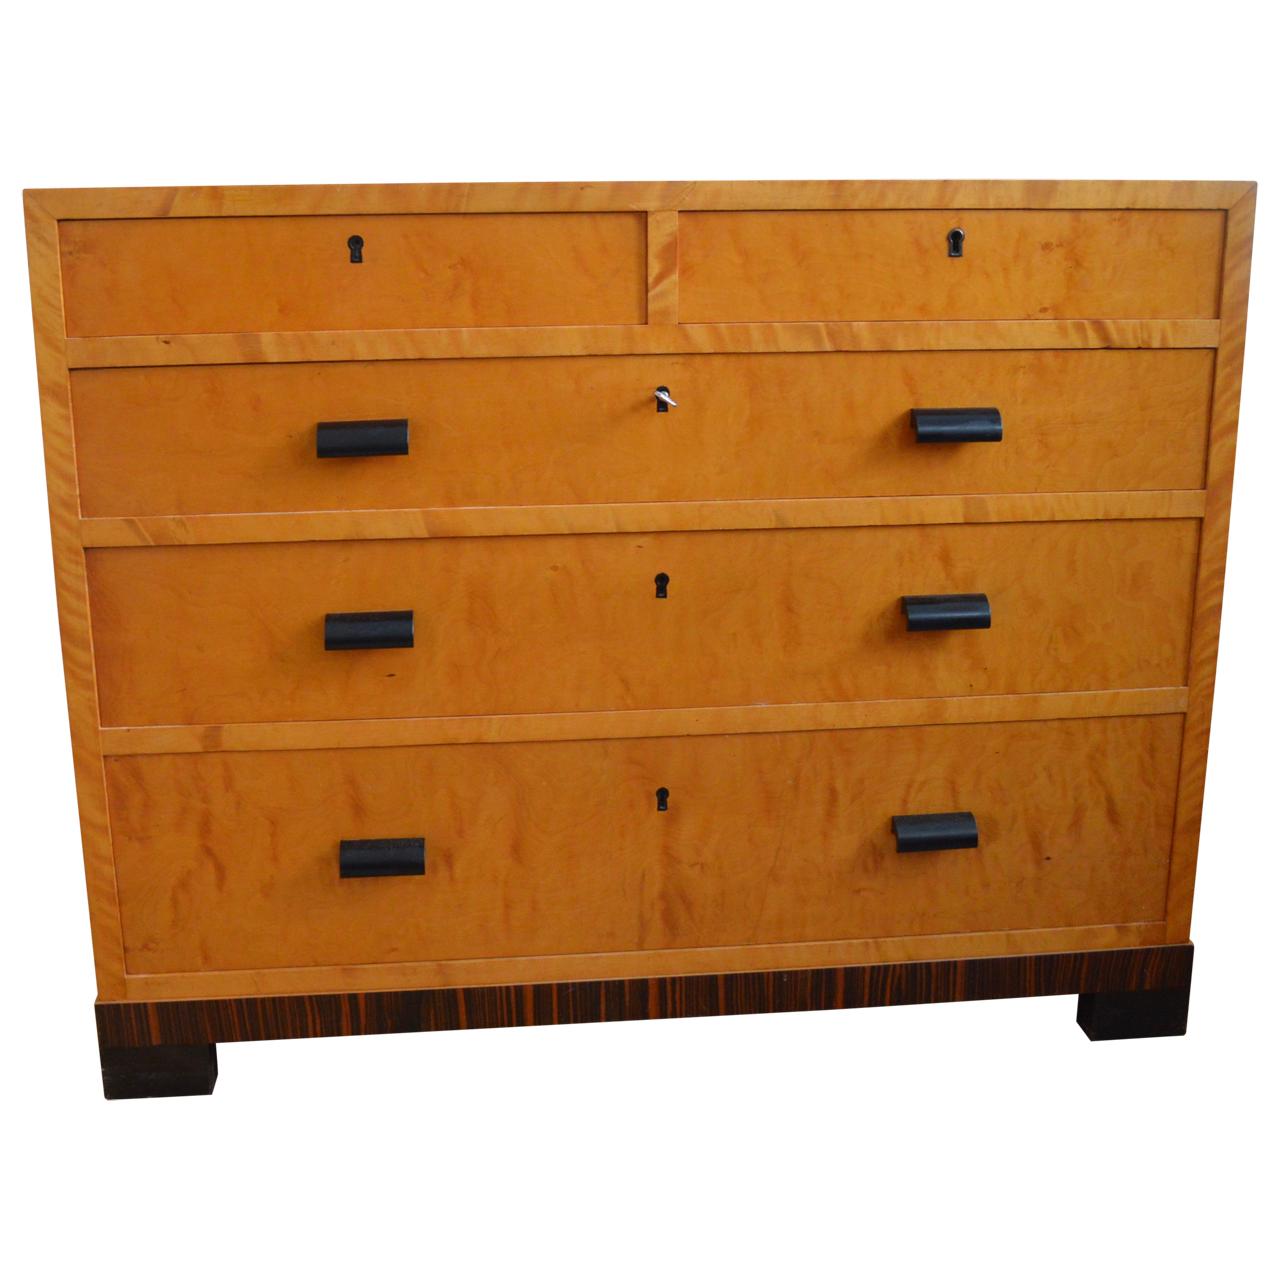 Beautiful rectangular satinwood dresser with clean lines and bird’s-eye maple and zebra wood veneer.
The dressers has three large drawers and two smaller drawers with locks at the top.